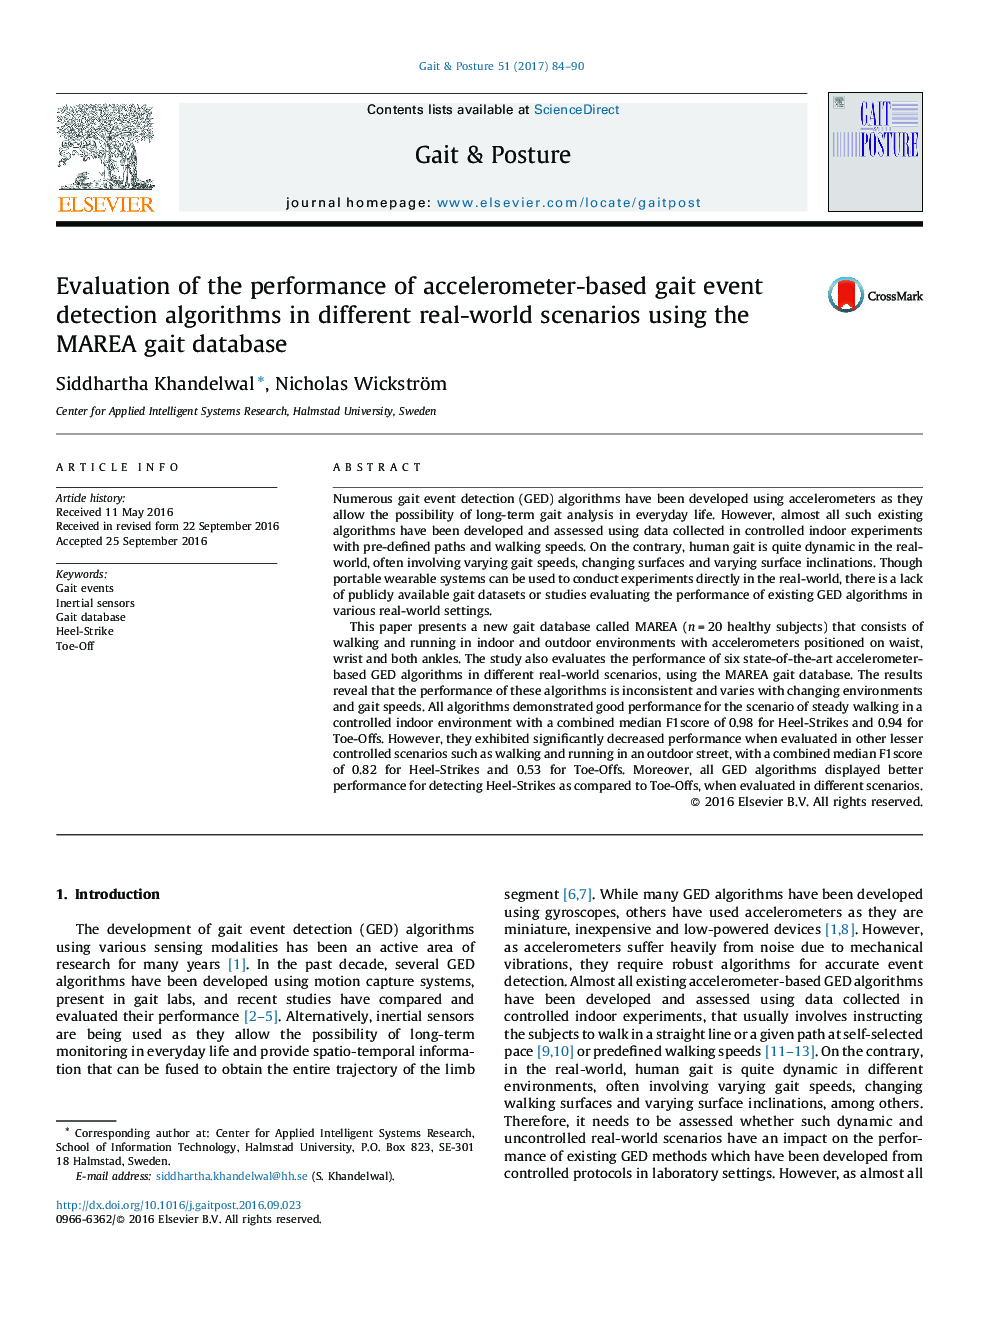 Evaluation of the performance of accelerometer-based gait event detection algorithms in different real-world scenarios using the MAREA gait database